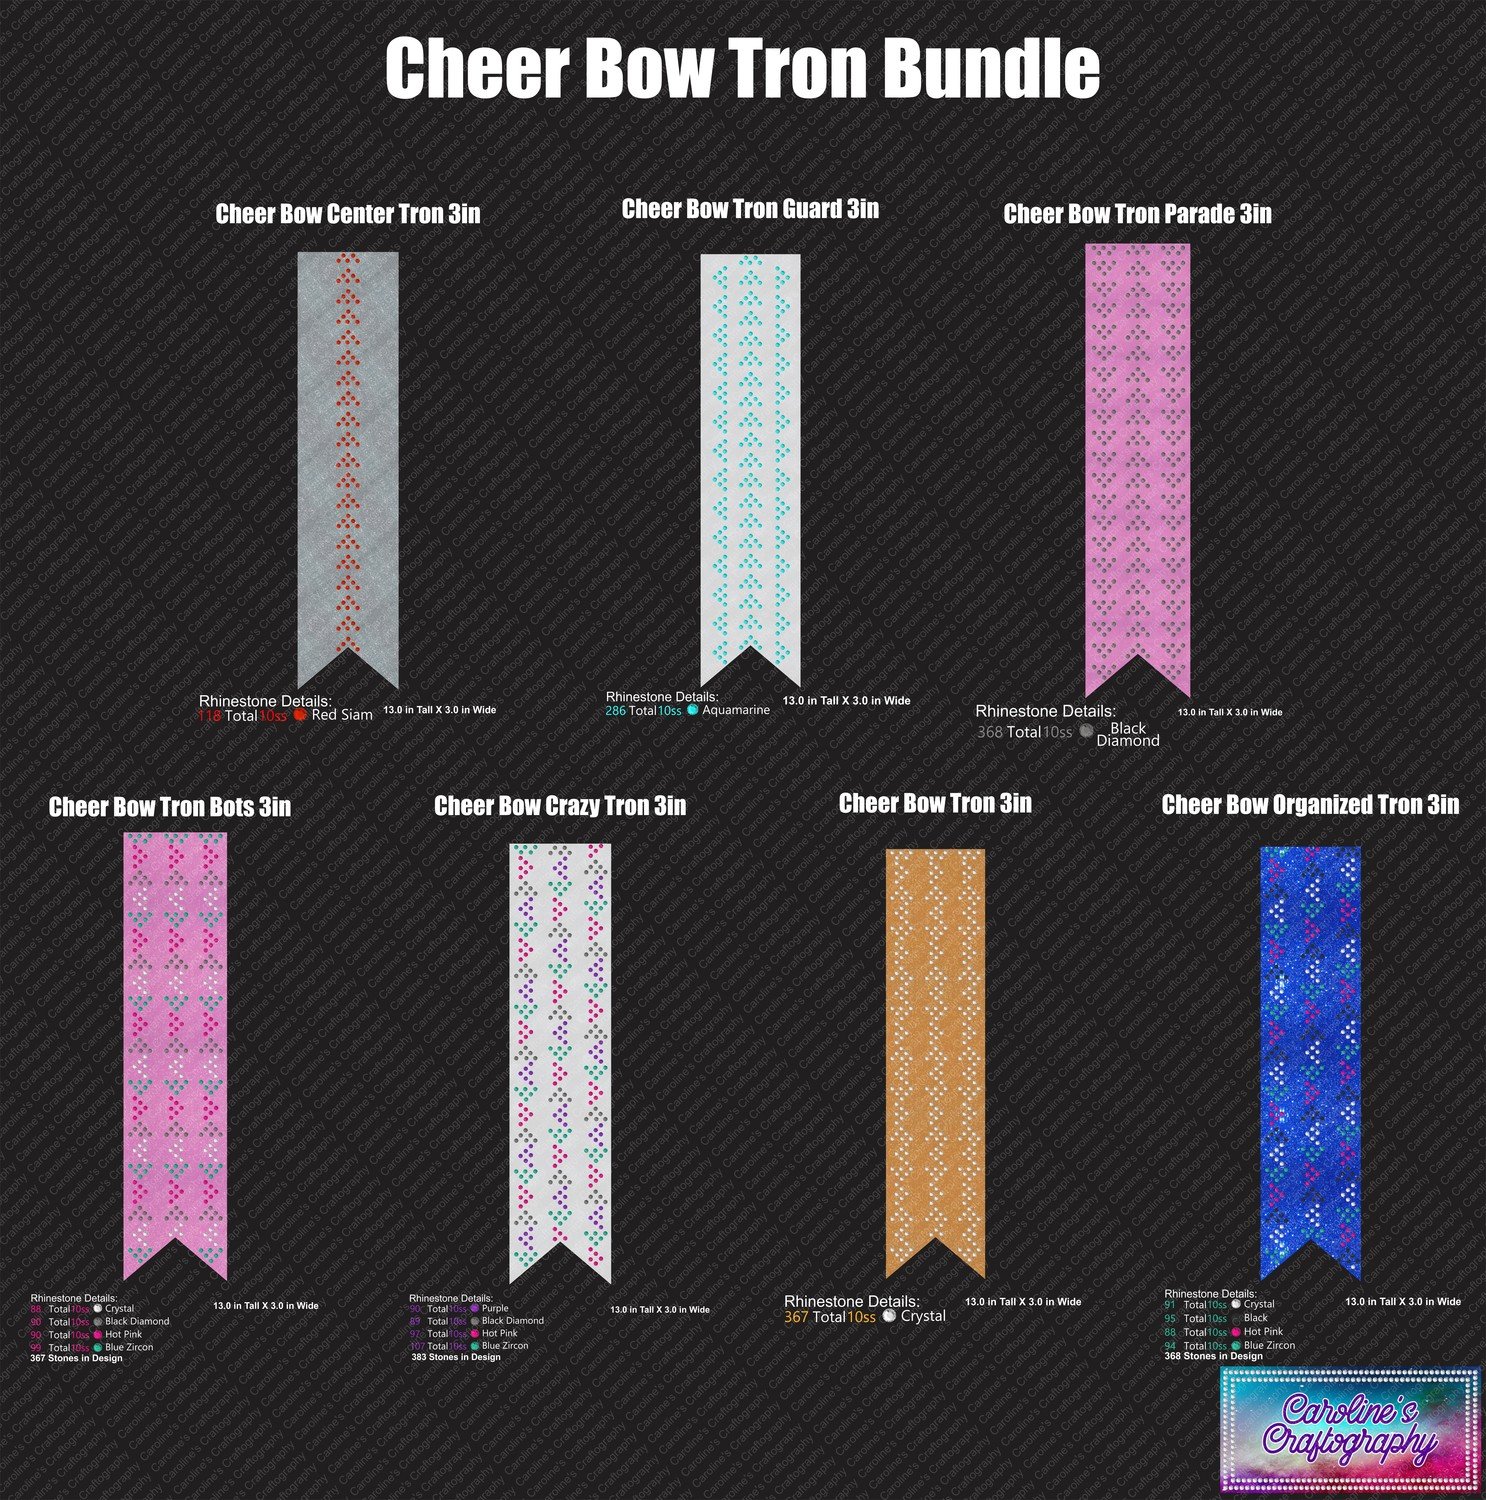 Cheer Bow Tron Bundle 3in Stone